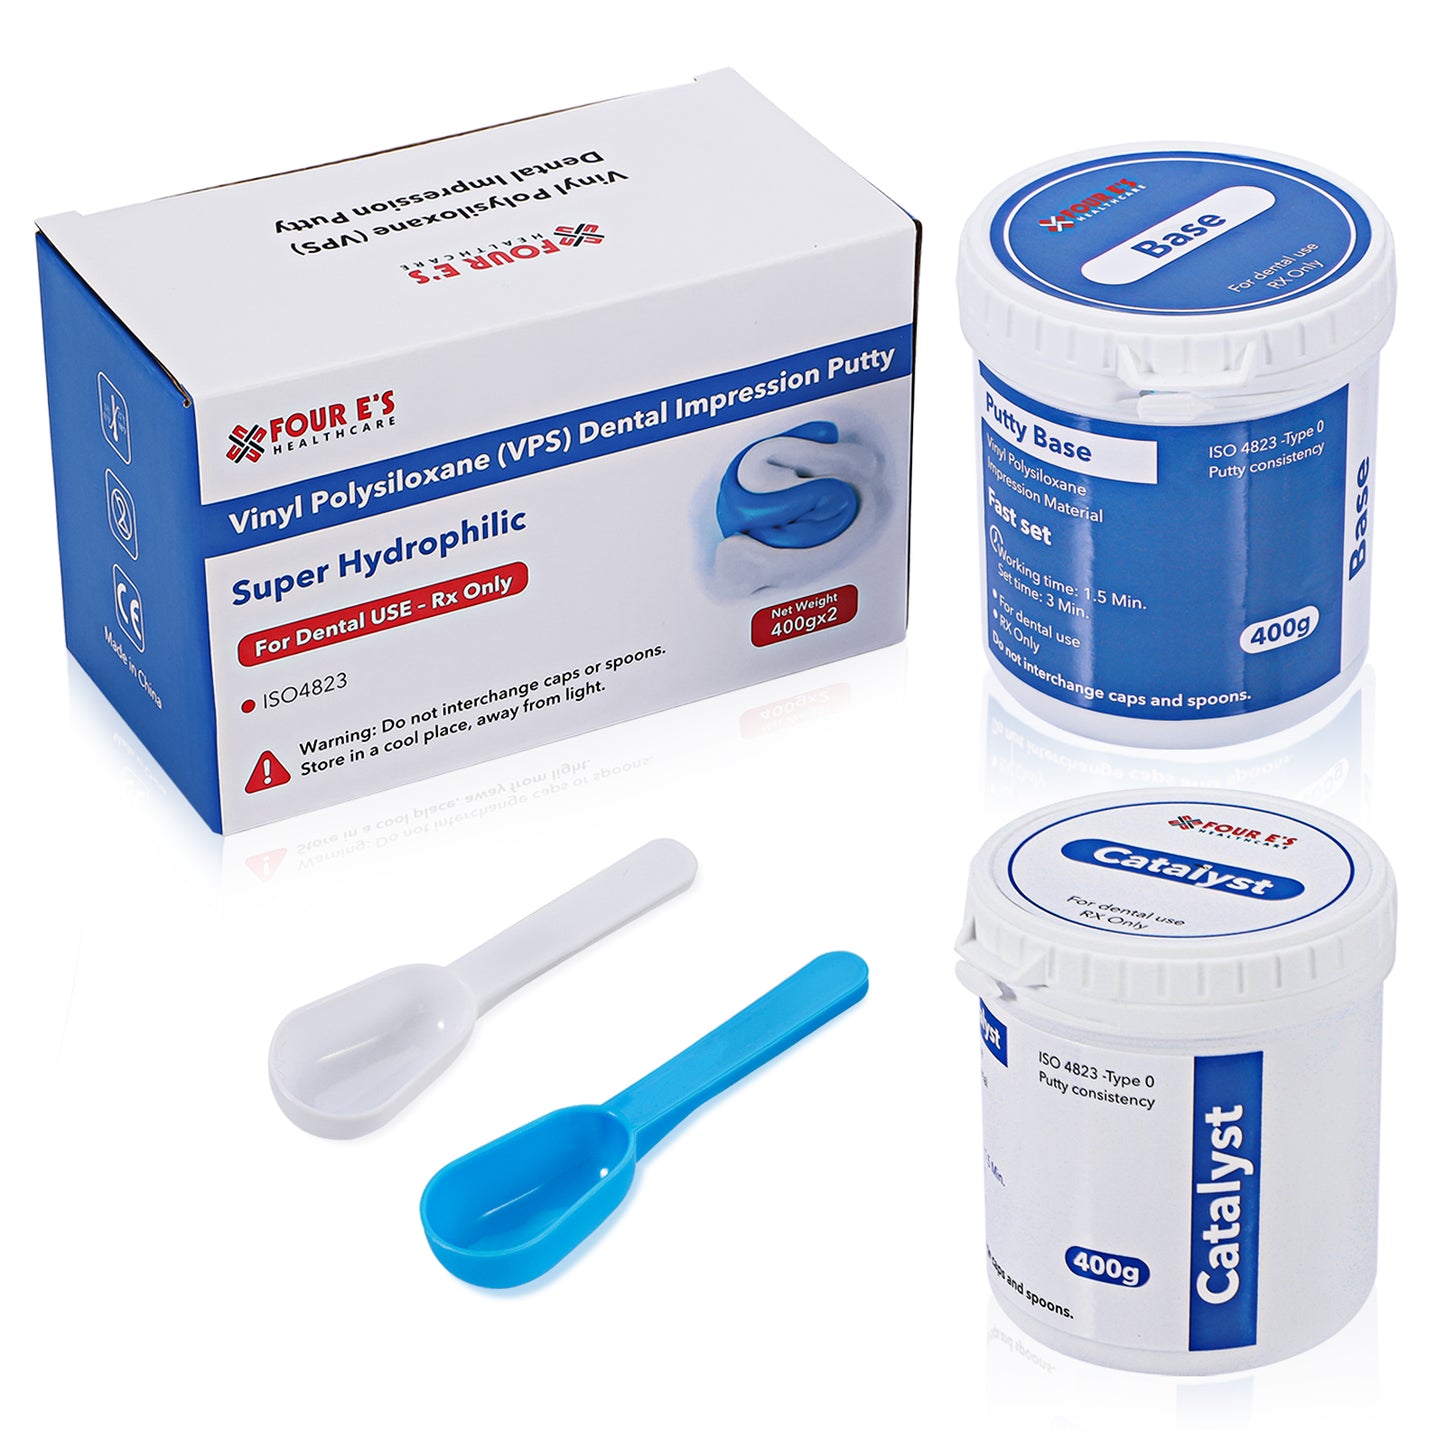 4E's USA Dental Impression Putty Fast Set | 800g VPS Putty (400g Base & 400g Catalyst) | 510K Approved | Super Hydrophilic,High-Acuuracy & High-Stability, Ideal for Tooth & Gum Details Reproducing